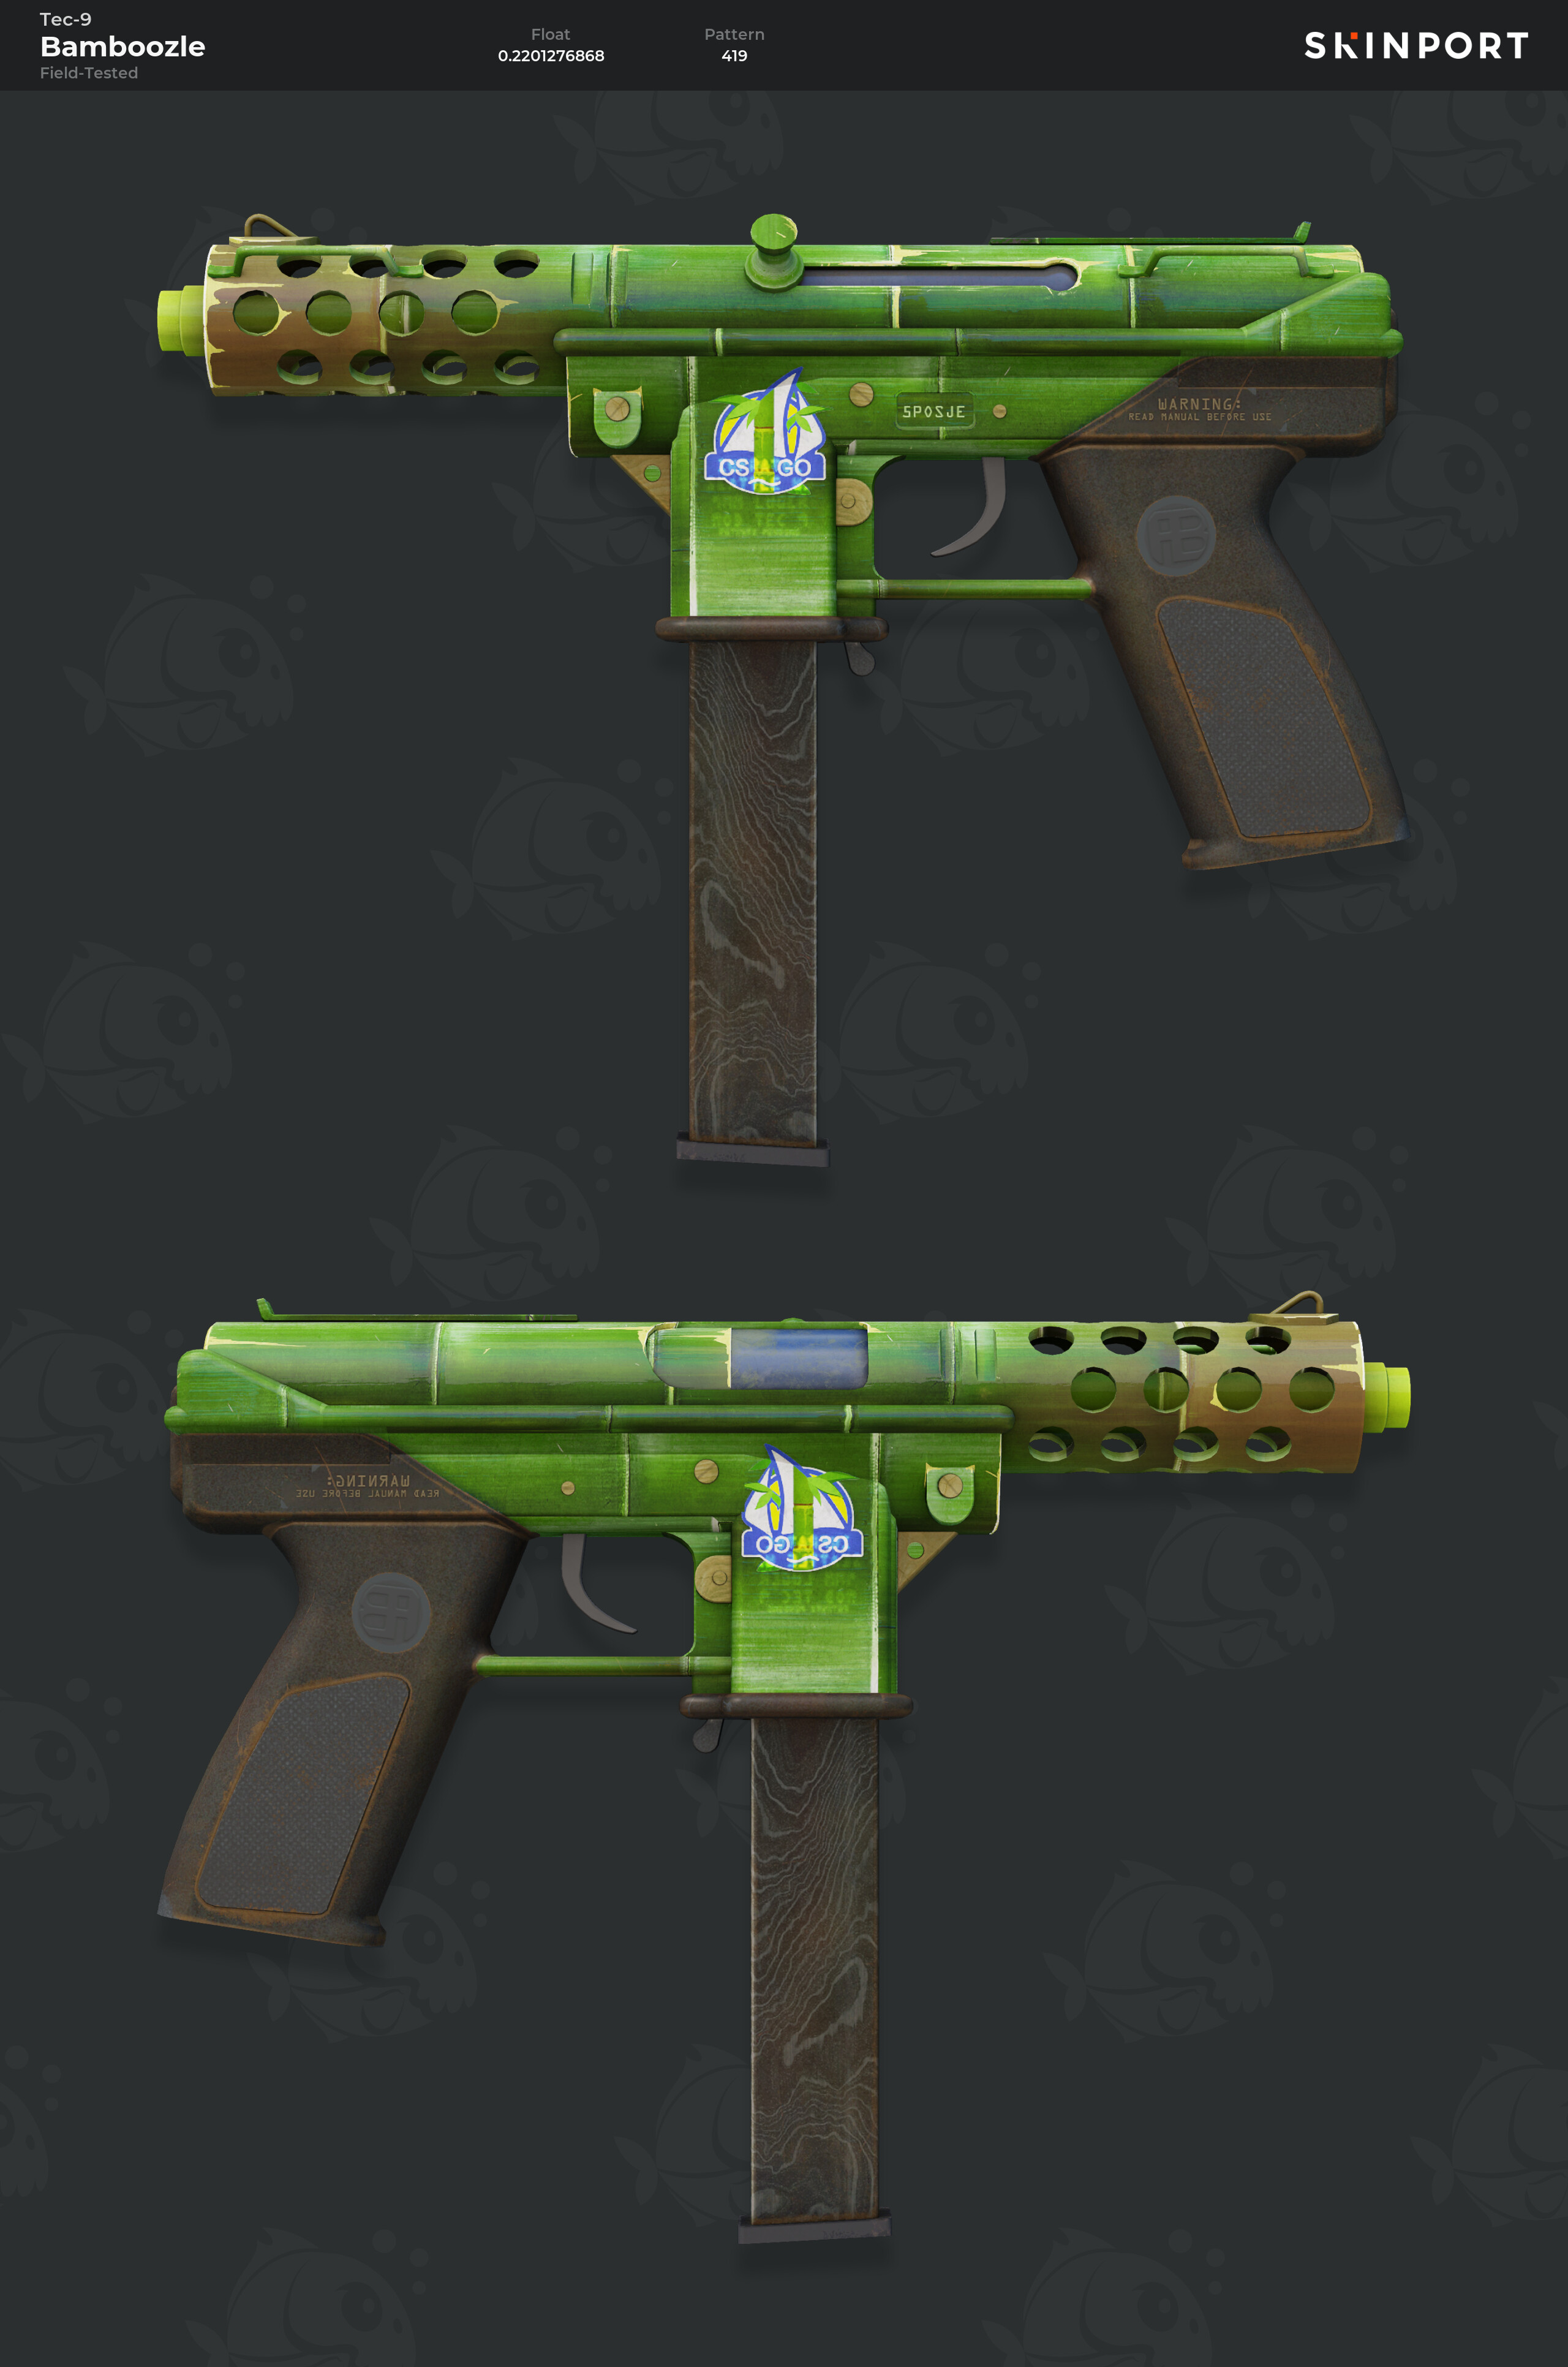 Tec-9 Bamboozle cs go skin download the new for windows